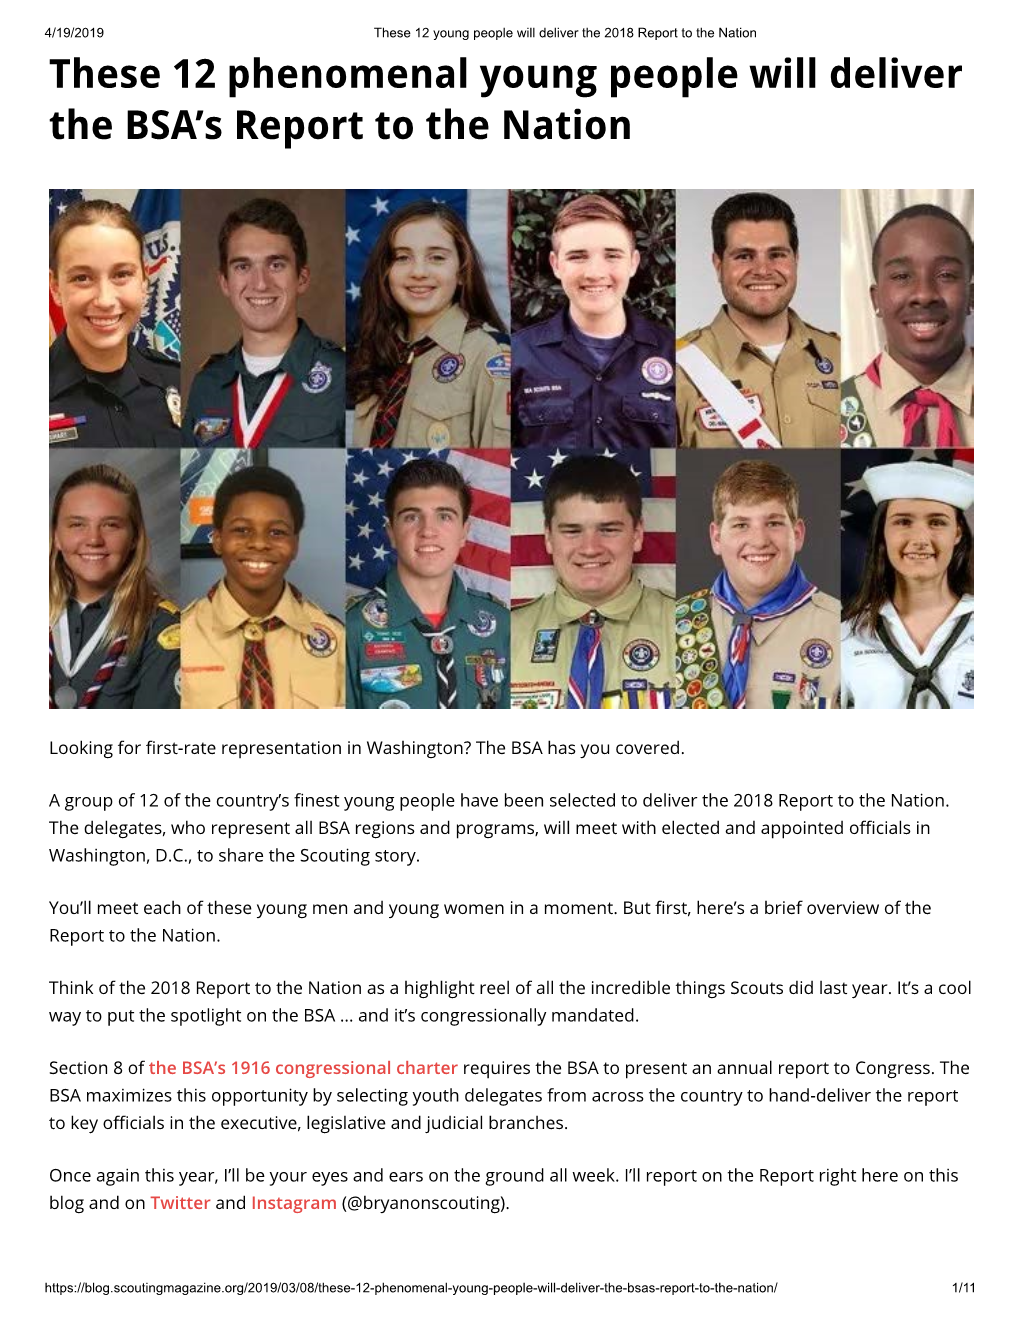 Trevor Burke, Eagle Scout from Texas